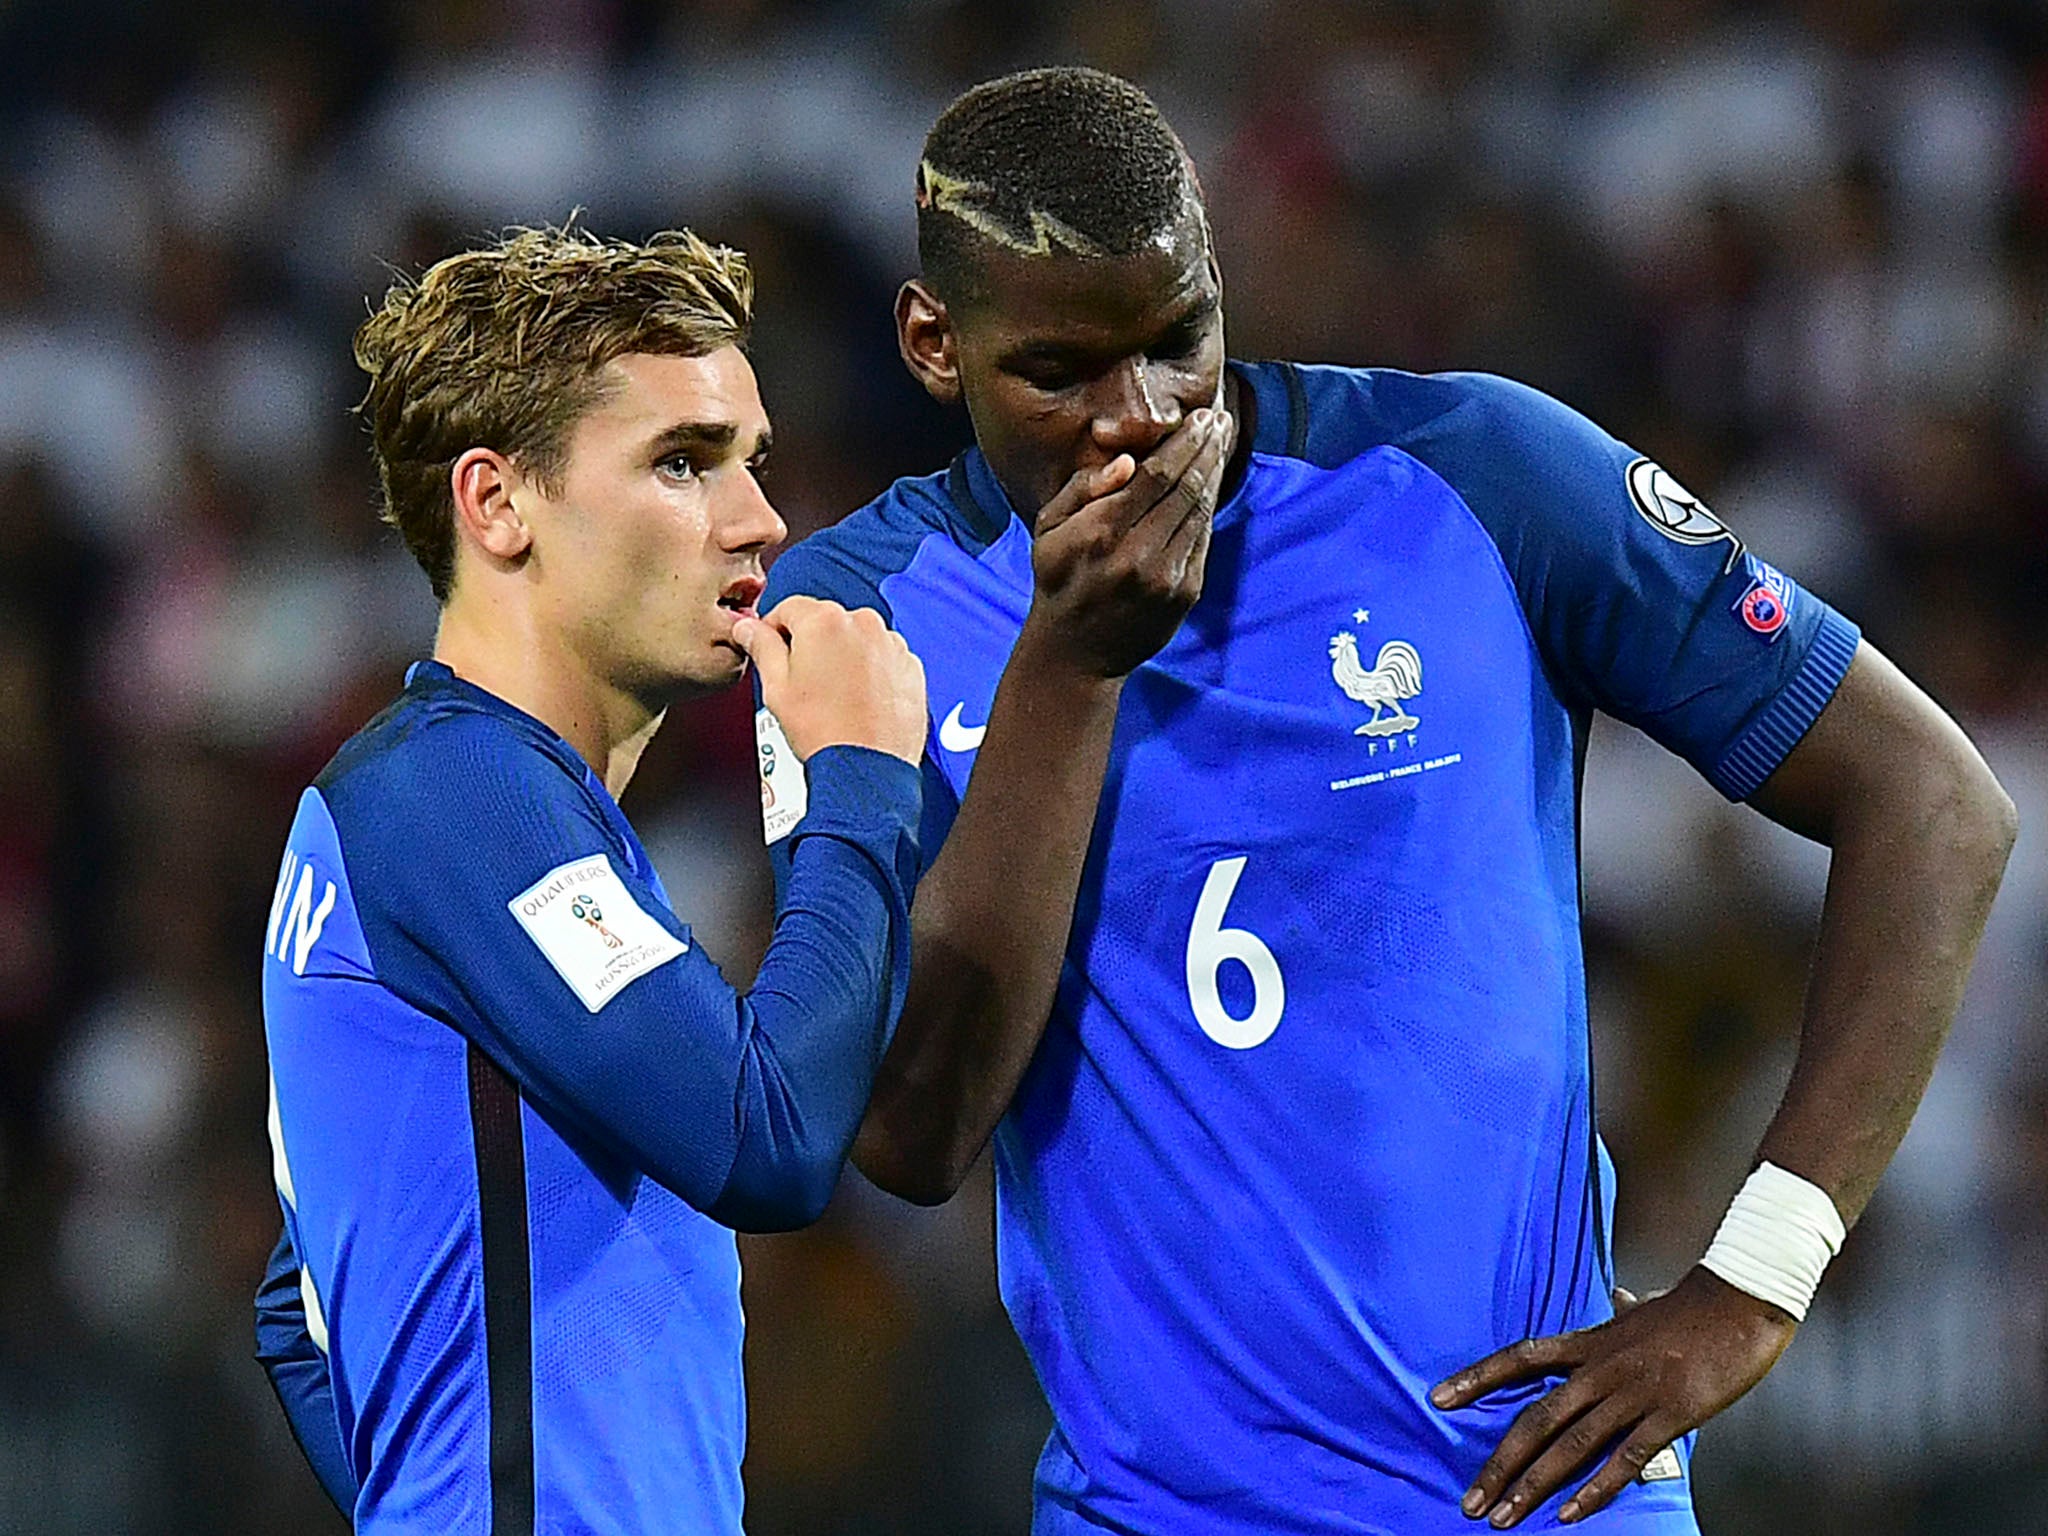 Griezmann and Pogba became close friends at Euro 2016